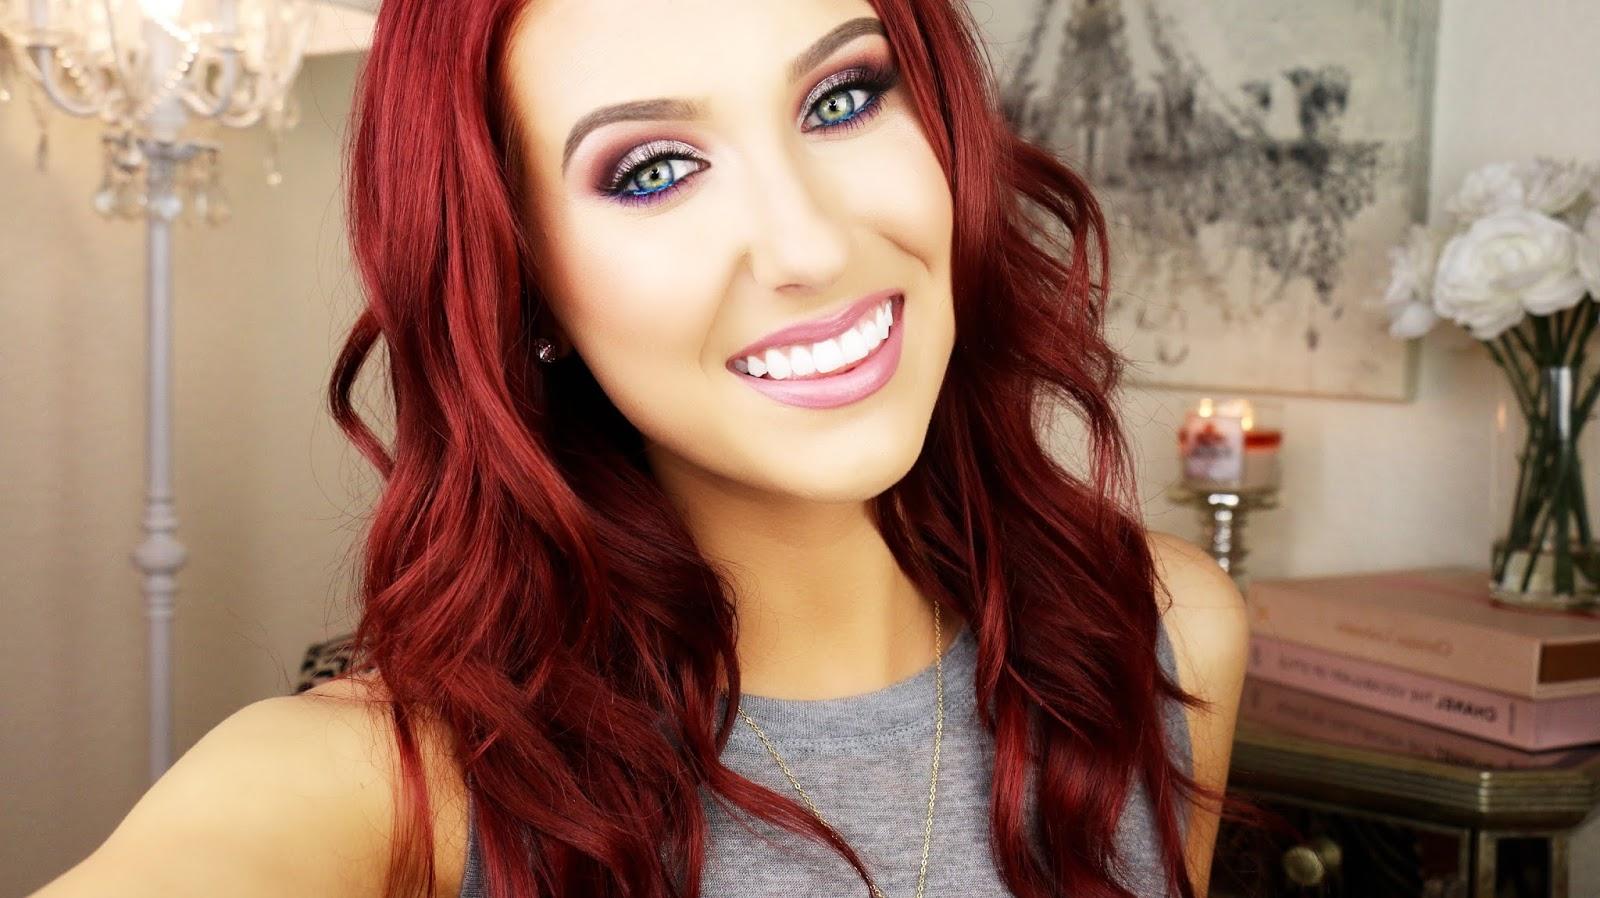 Jaclyn Hill is famous for sharing makeup tutorial videos